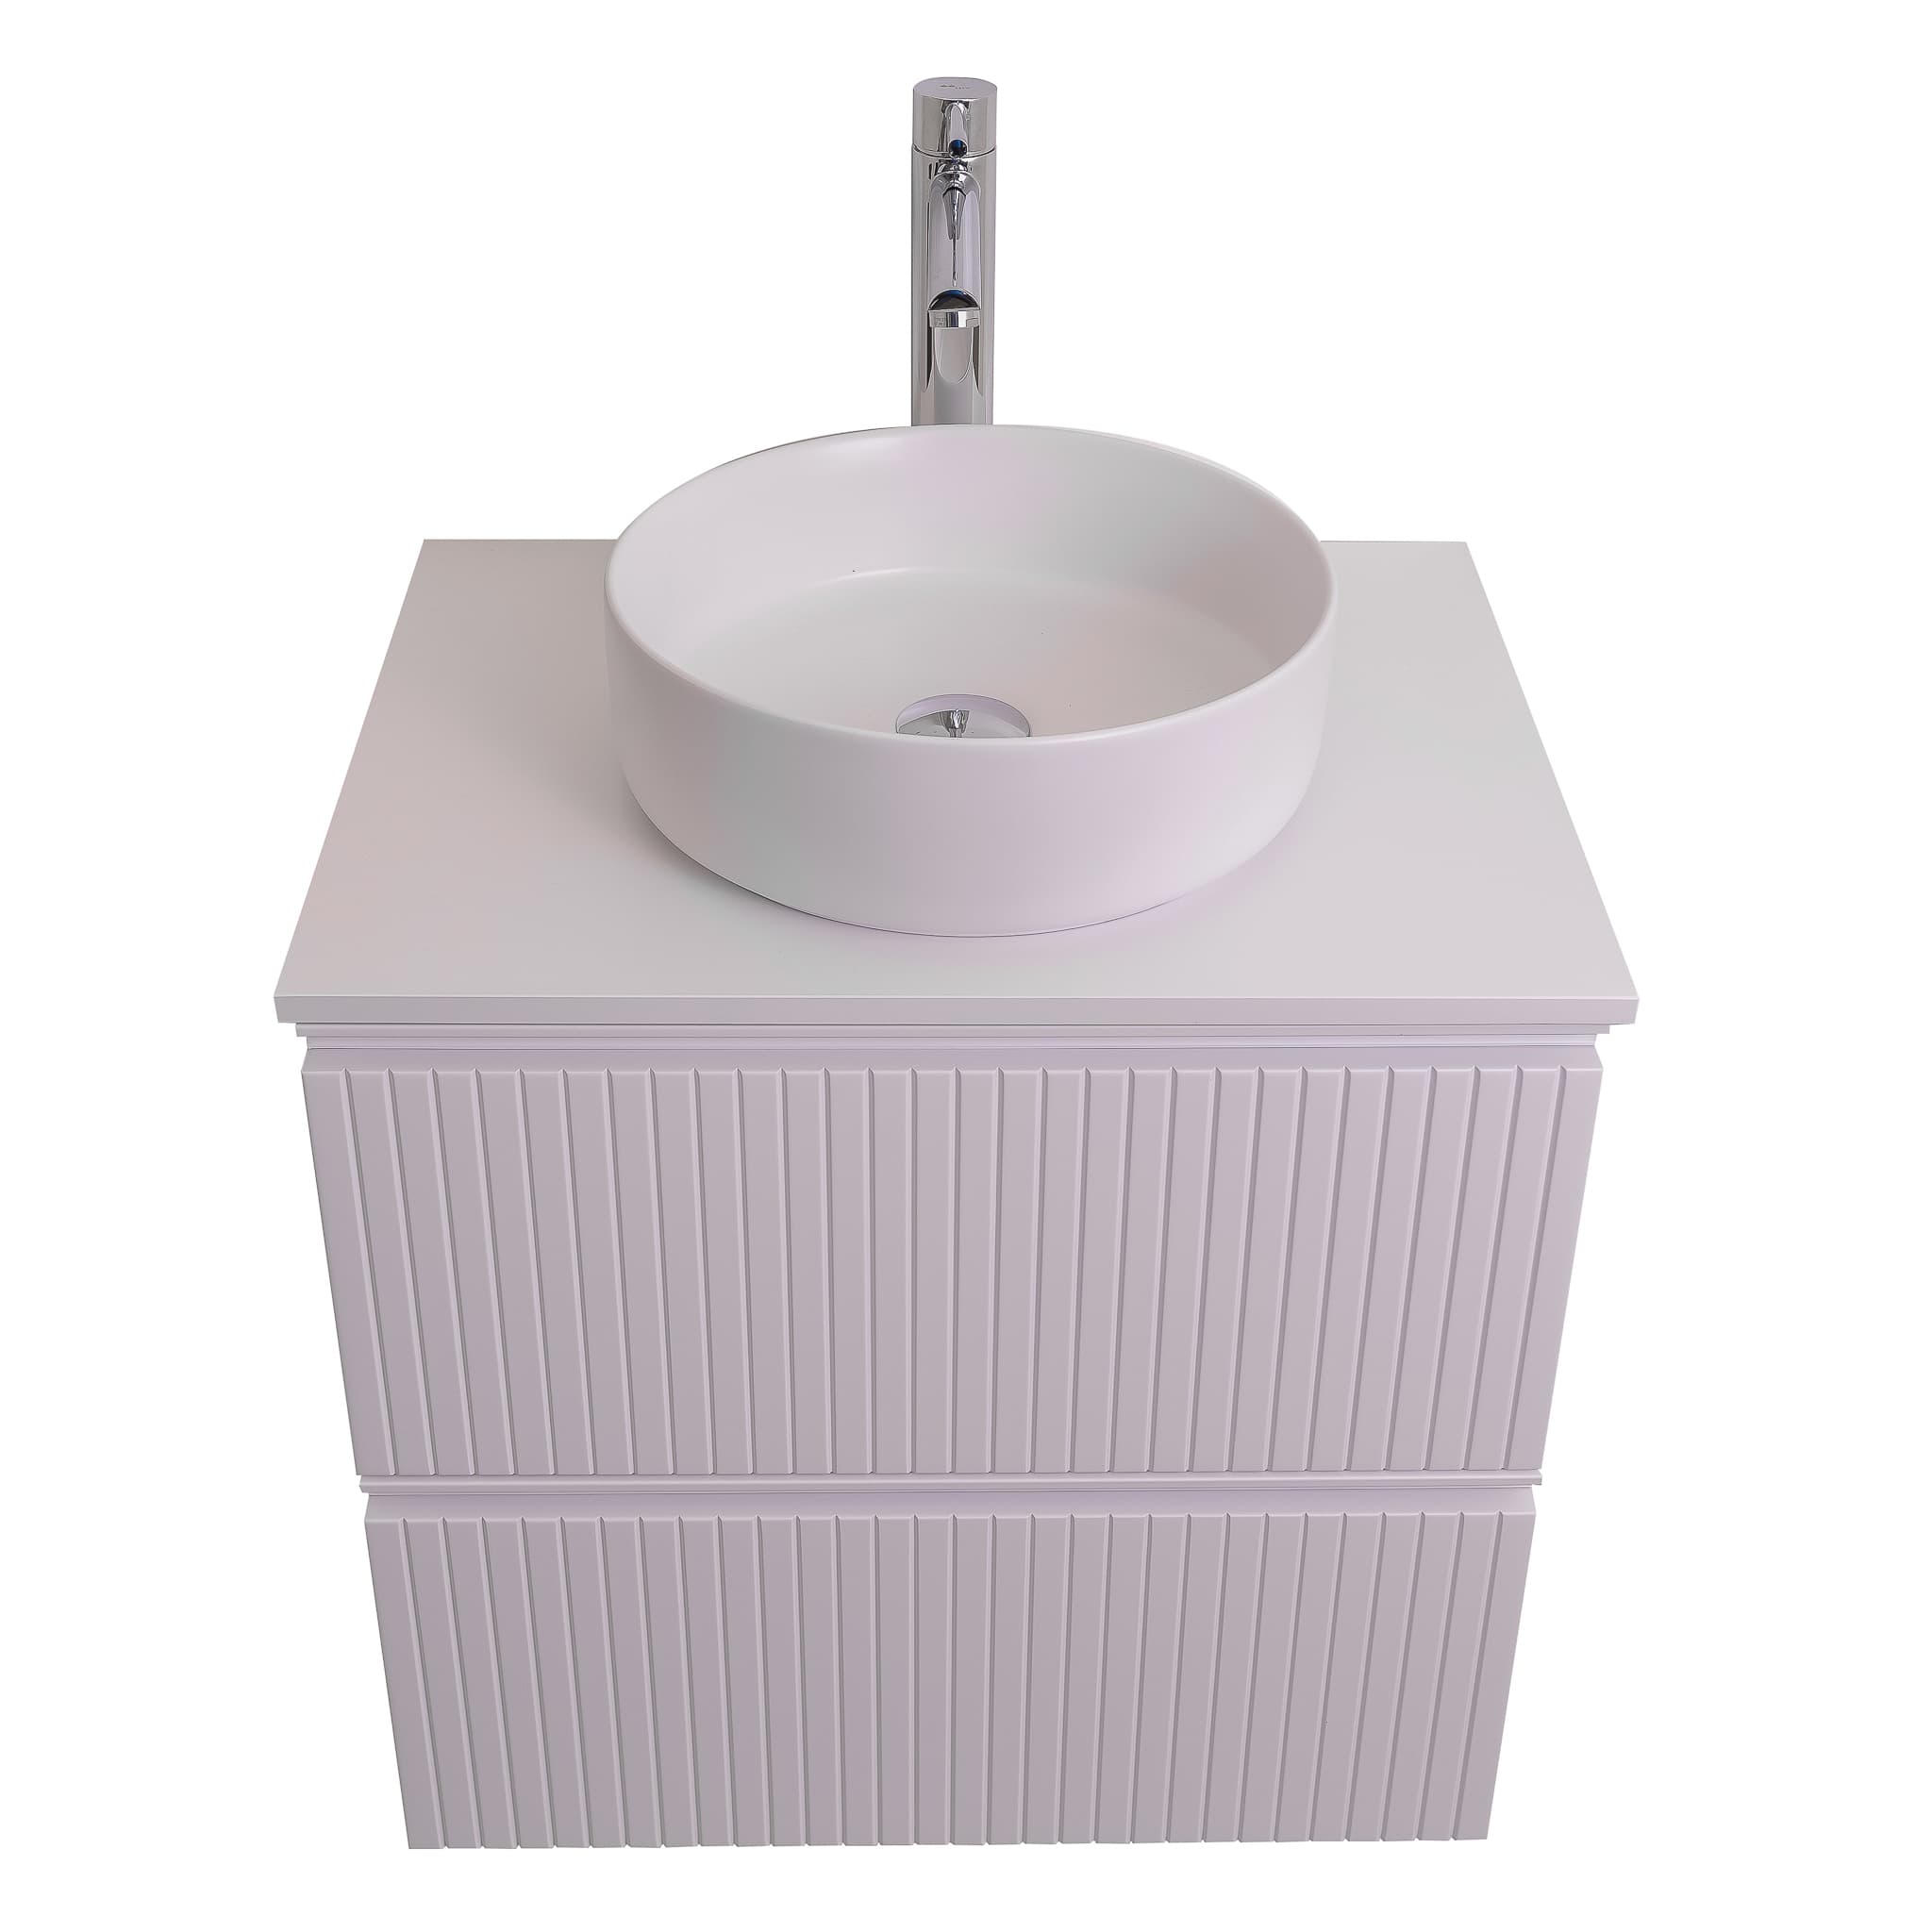 Ares 23.5 Matte White Cabinet, Ares White Top And Ares White Ceramic Basin, Wall Mounted Modern Vanity Set